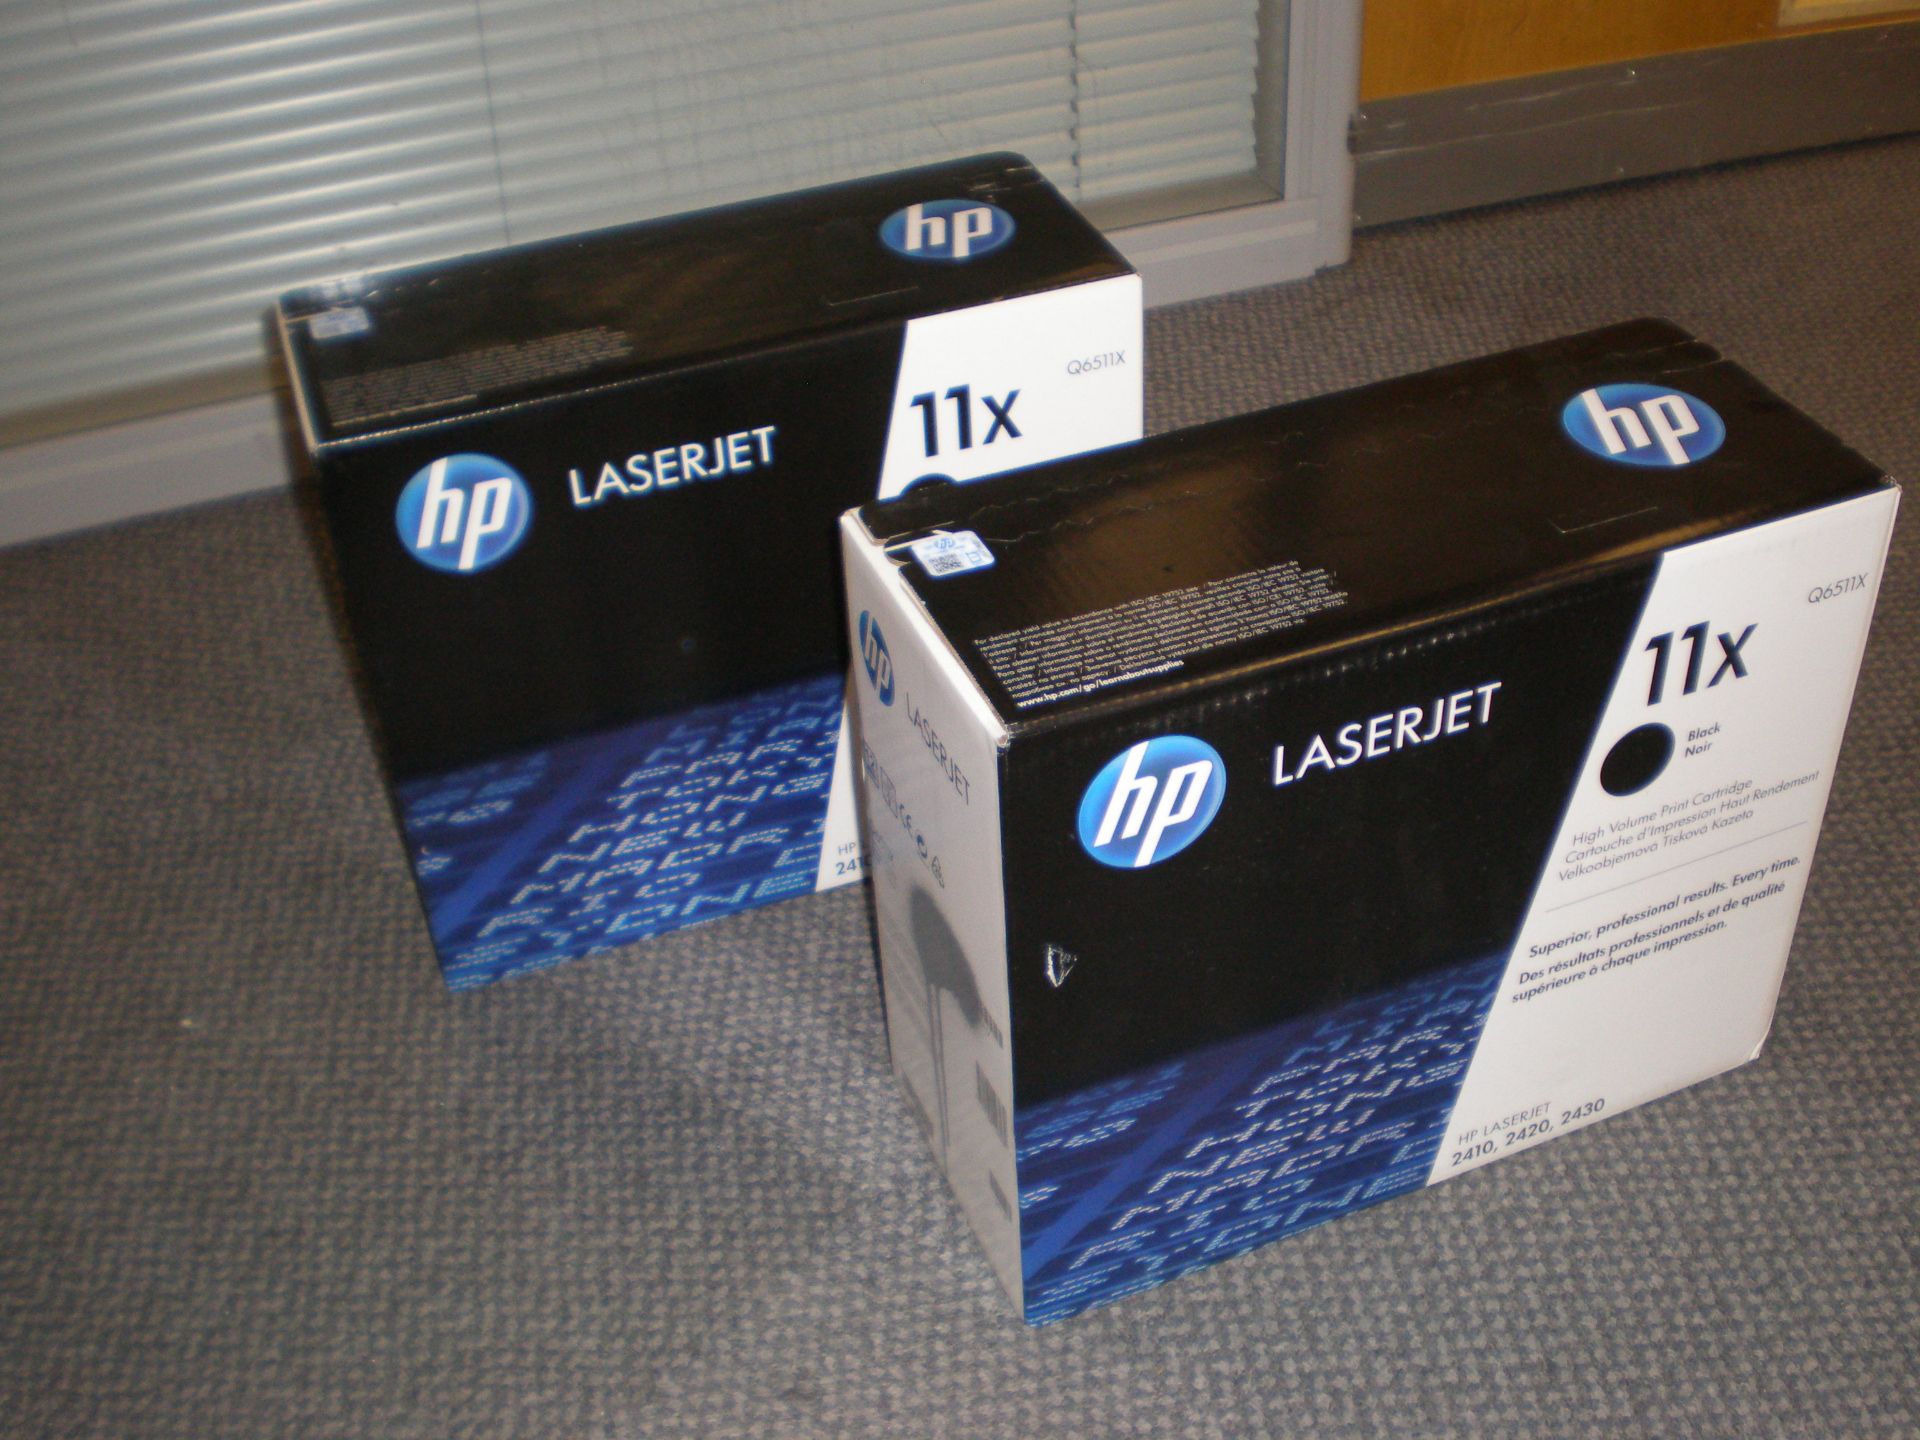 Pair (X2) Brand New Authentic Hp Toner For Hp Laserjet 2410, 2420, 2430, Hp Code Q6511X (Selling